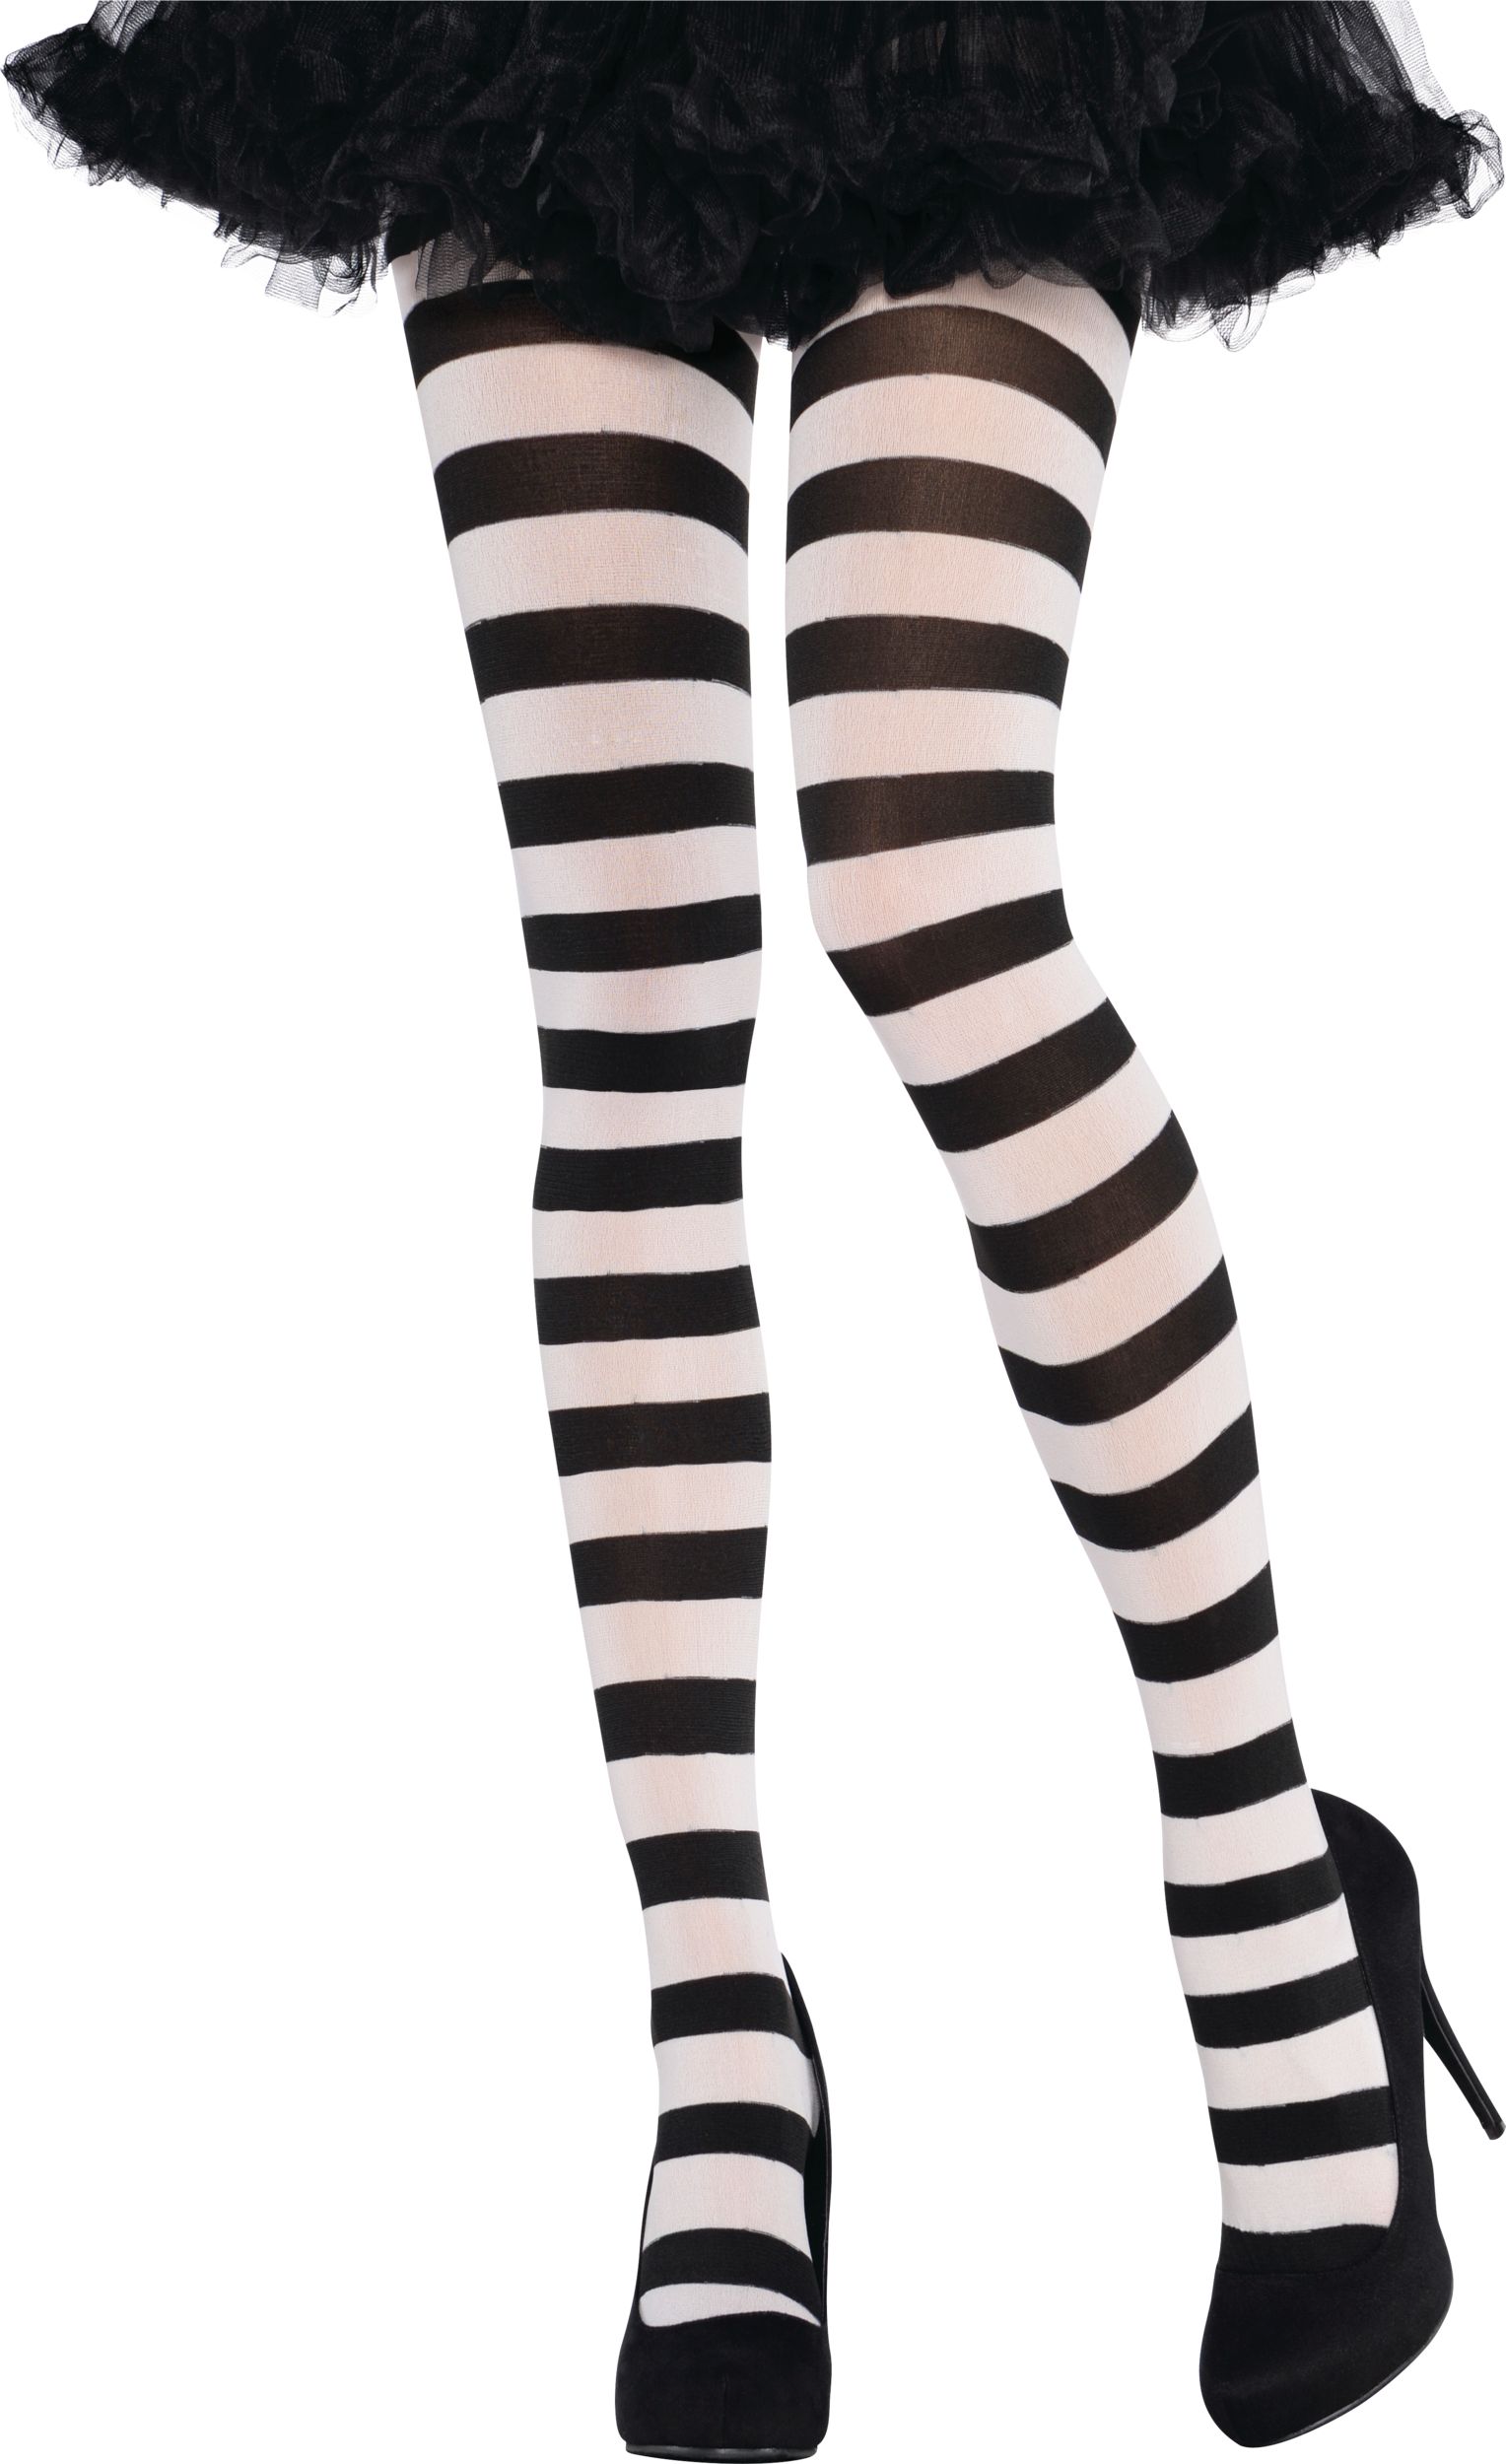 Kids' Semi-Opaque Seamless Tights, White, Assorted Sizes, Wearable Costume  Accessory for Halloween